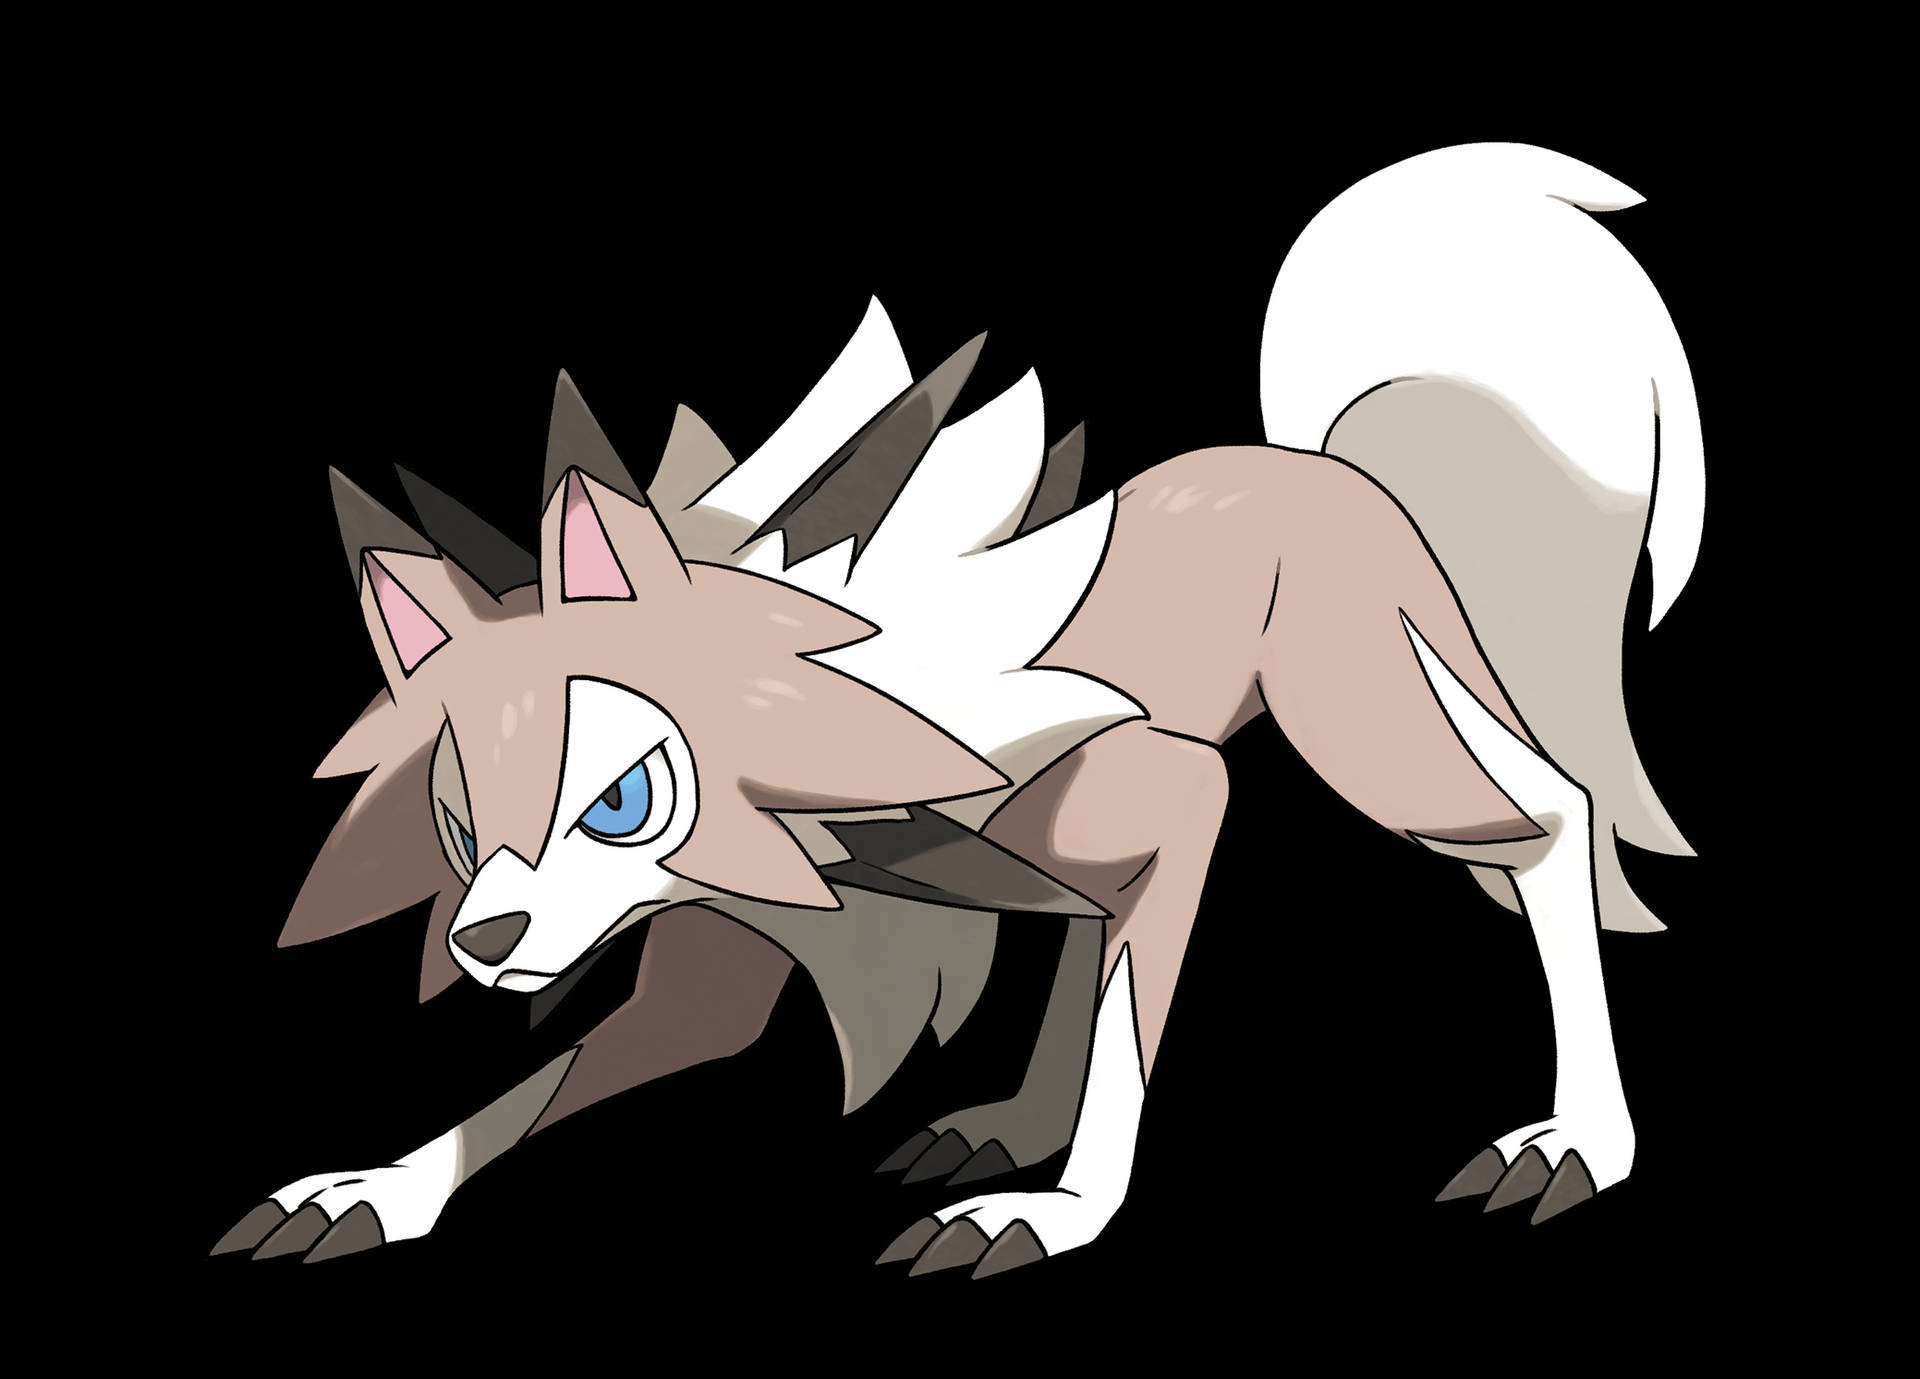 Astonishing Midday Lycanroc Stretching in Full Glory Wallpaper